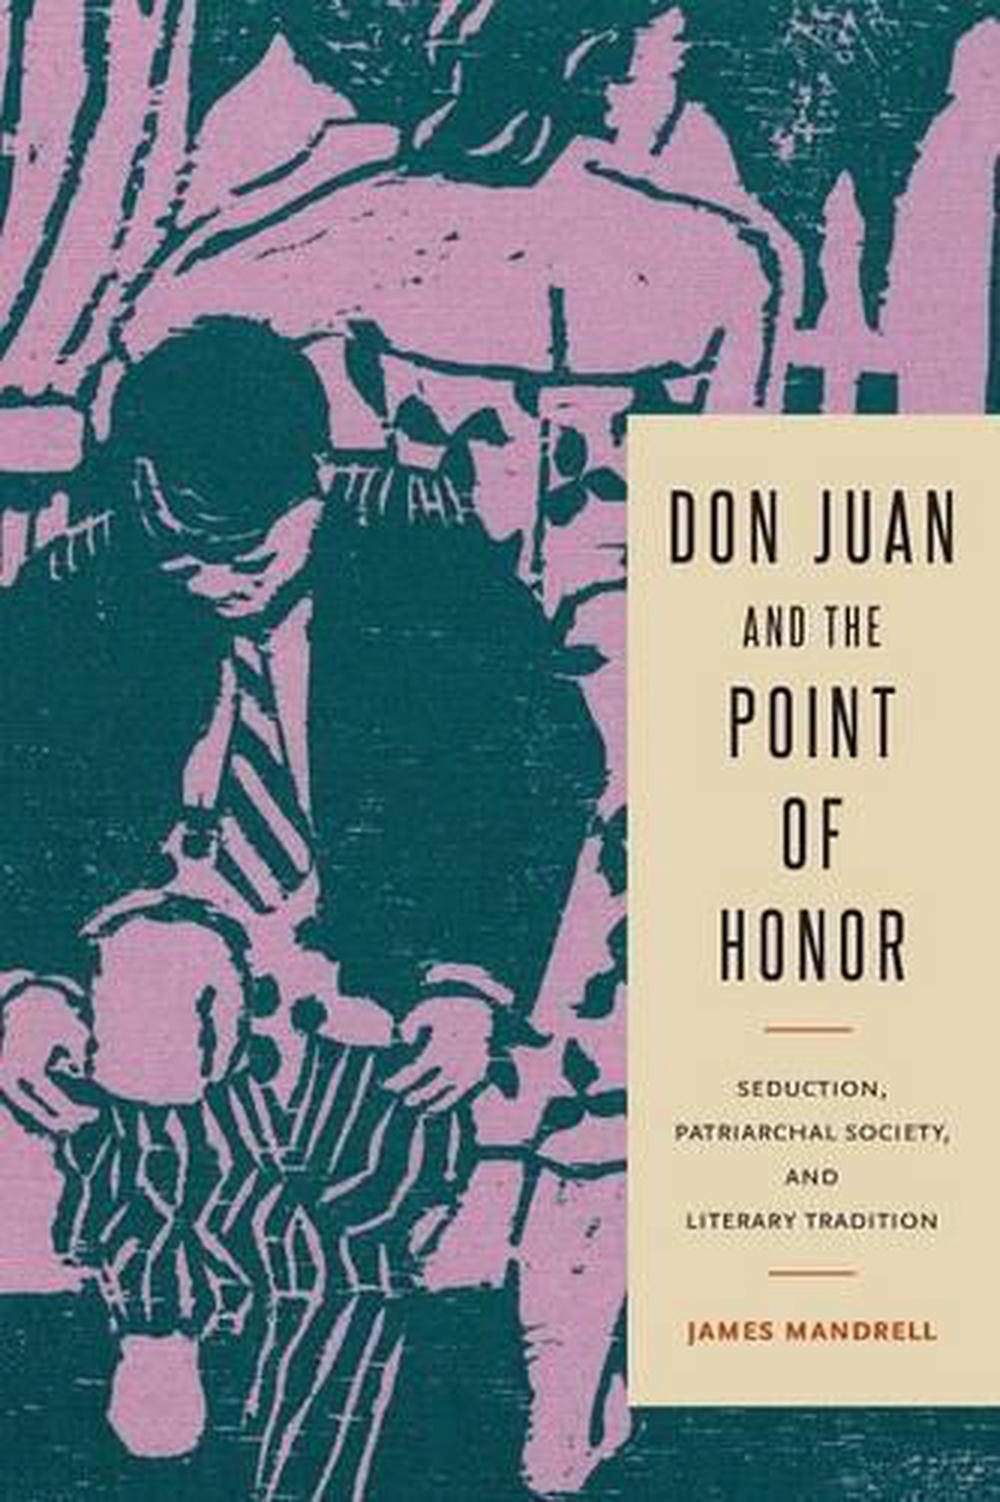 Don Juan and the Point of Honor Seduction, Patriarchal Society, and